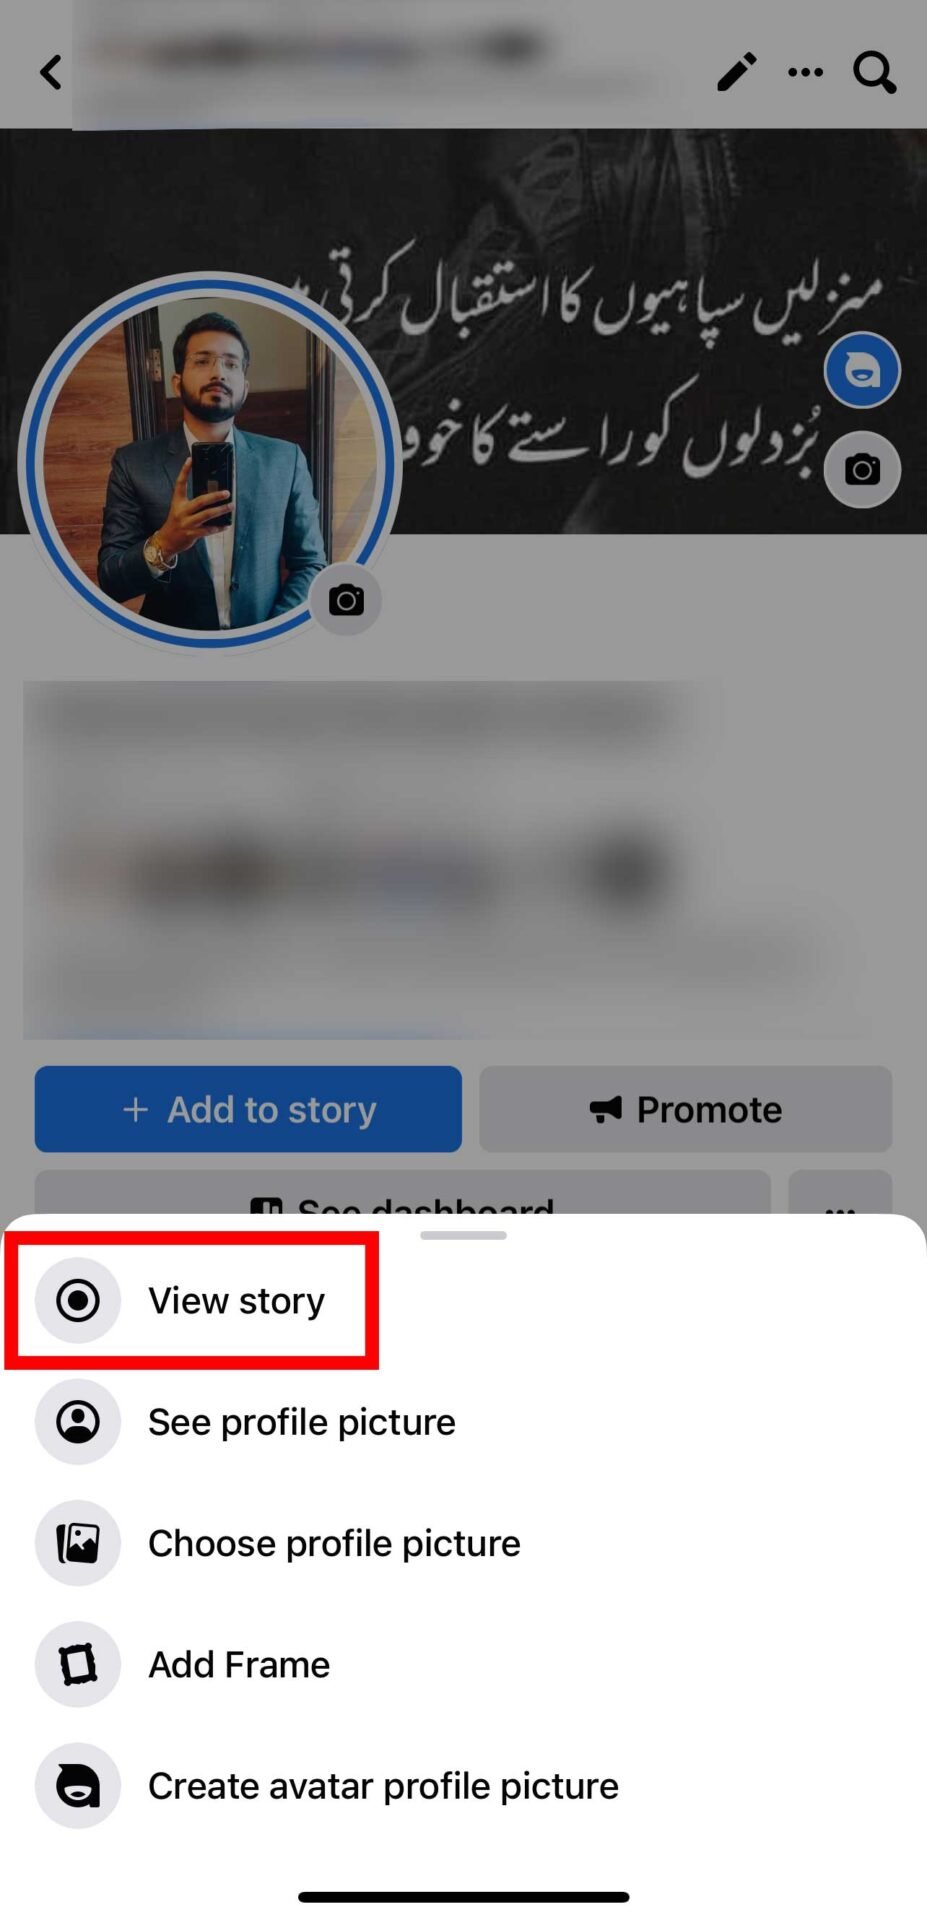 Click View Story